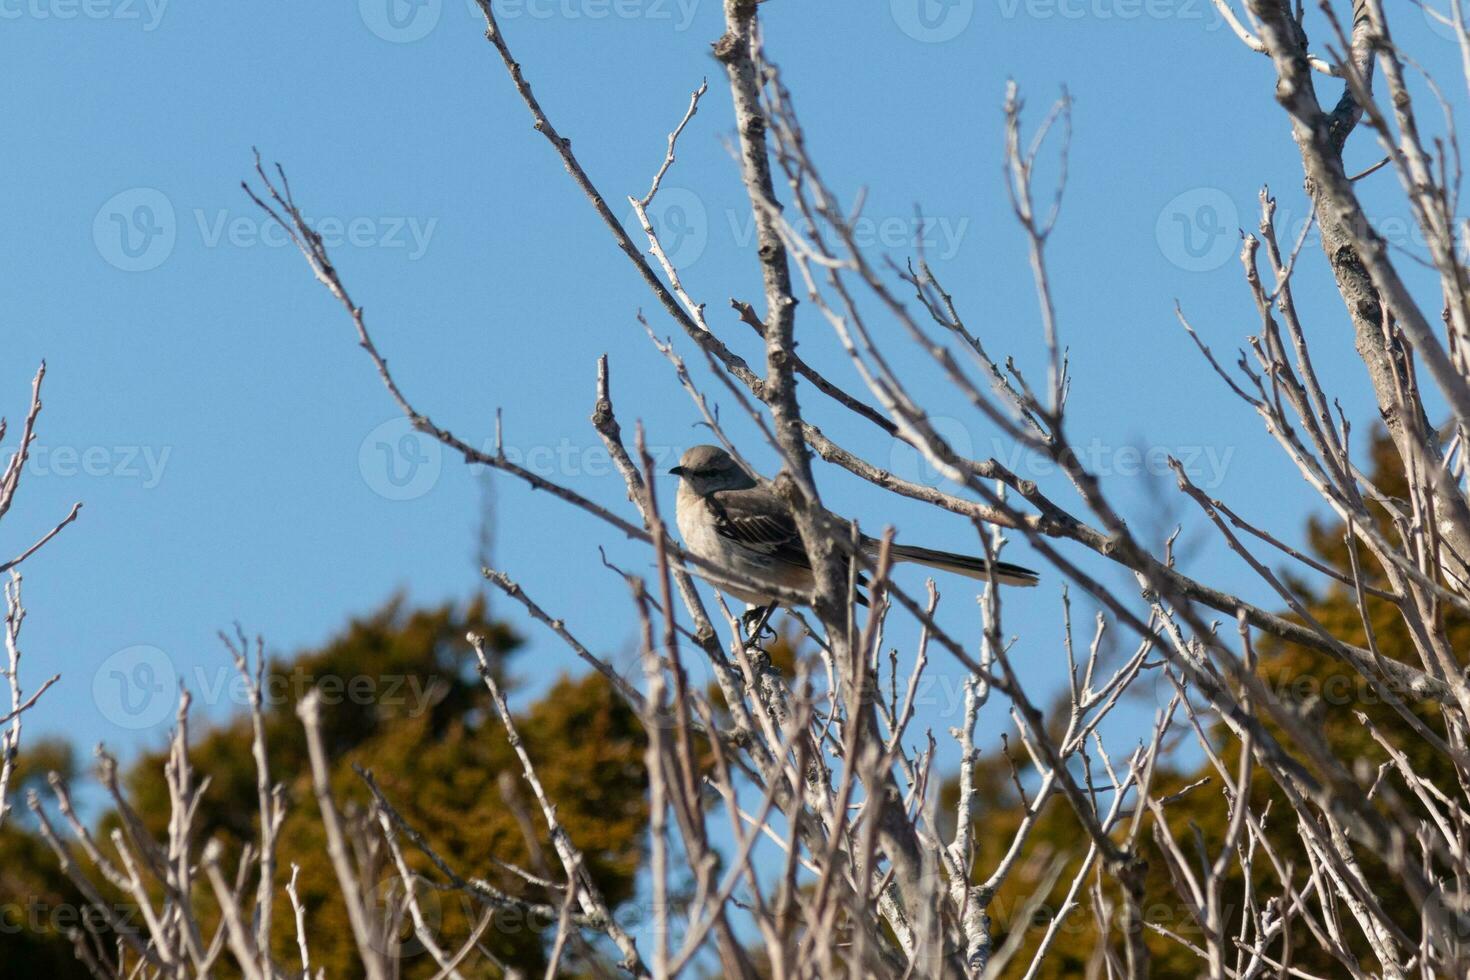 This cute little mockingbird sat posing in the tree when I took the picture. The branches he sat in did not have any leaves to hide him. The Winter season is just ending and Spring is arriving. photo